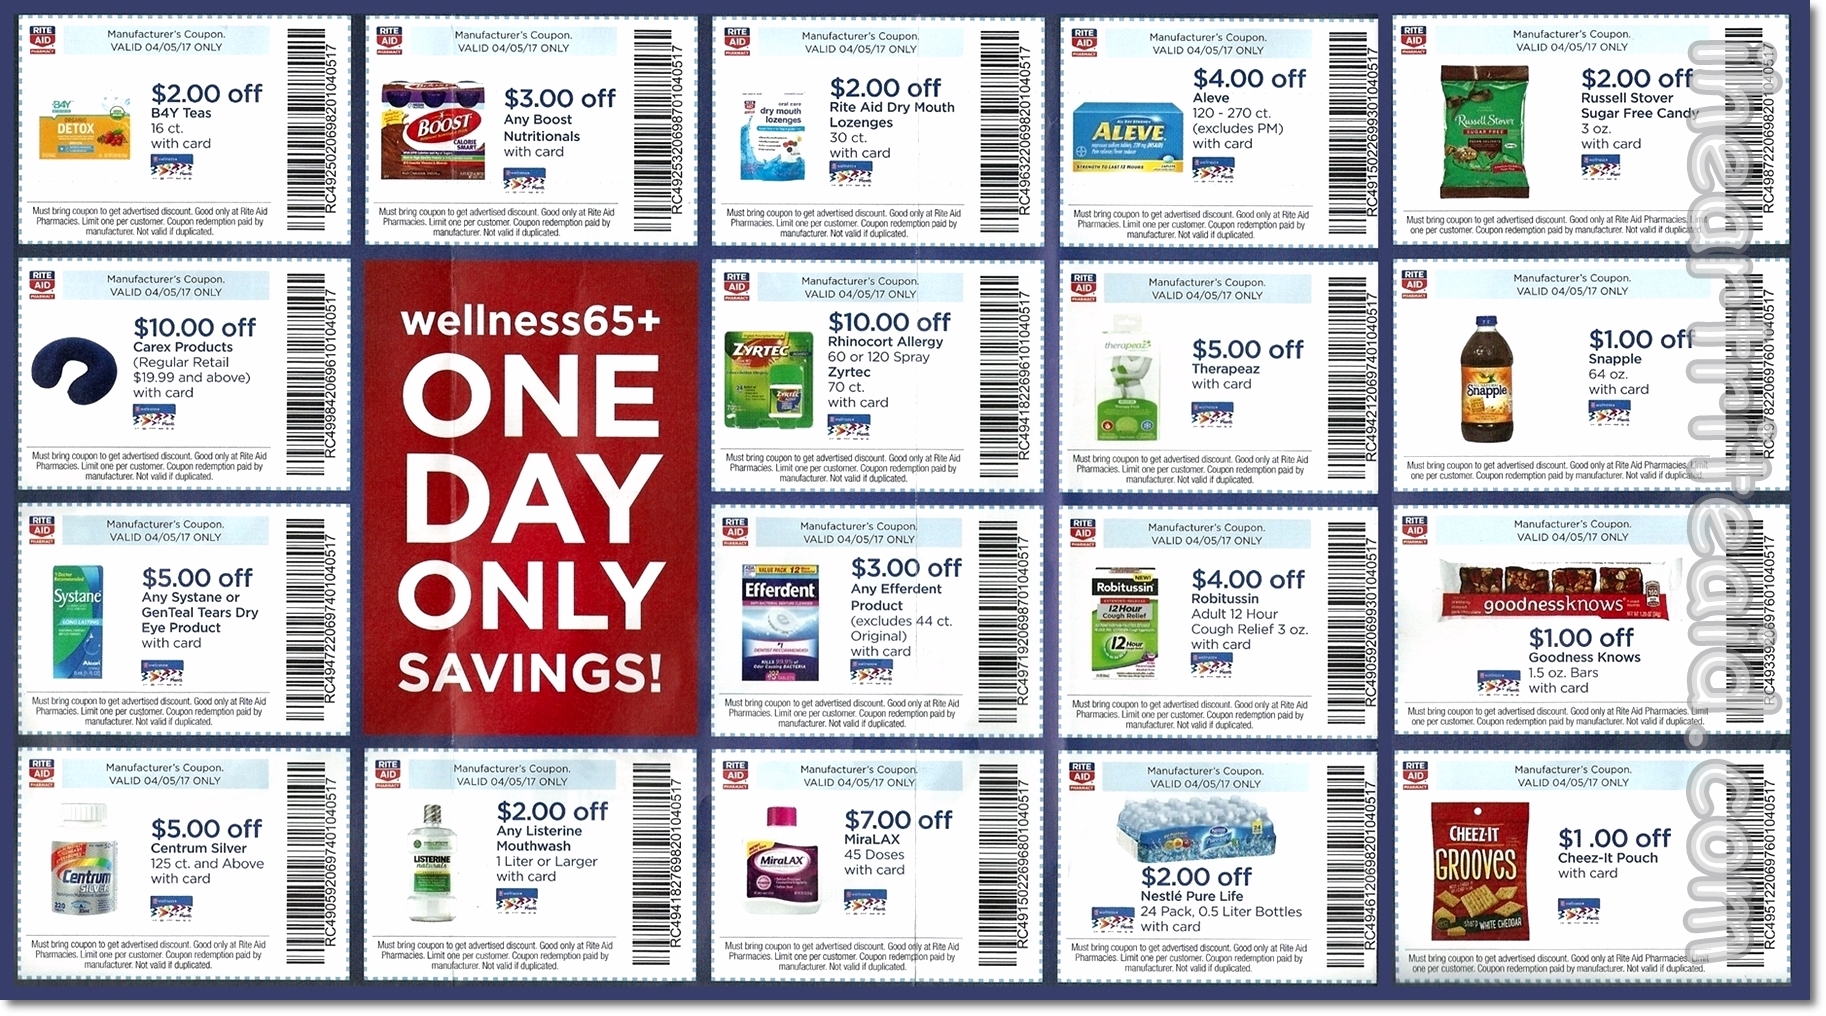 i heart rite aid april wellness+ wednesday coupons, valid 04/05/17 only